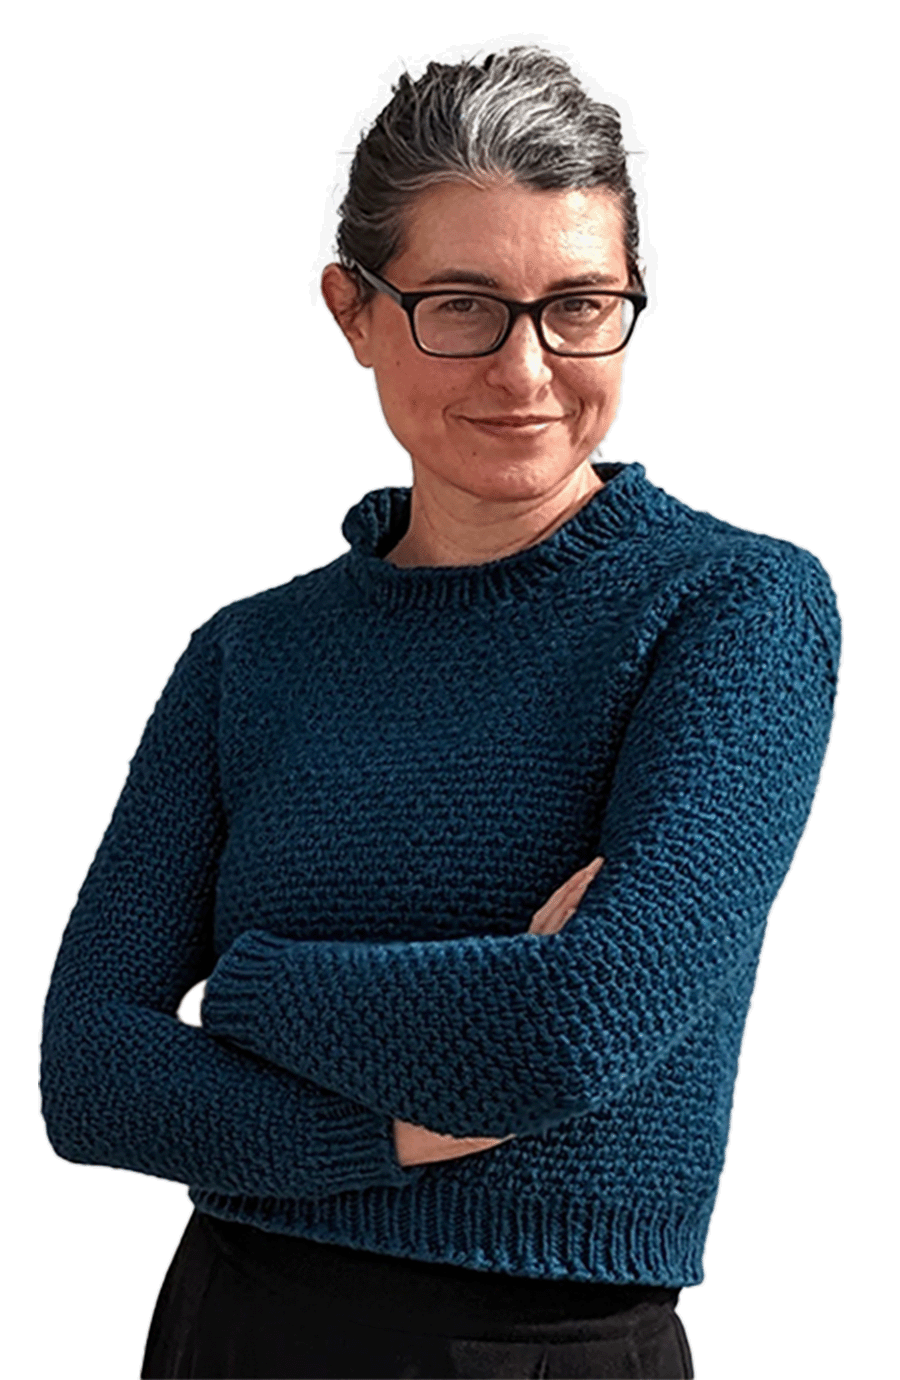 This is an image of me! I'm a white femme human in my 40s with a slight streak of gray in my dark hair. My arms are folded in front of me and I've got a self-satisfied look on my face as I sort of lean against a white brick wall. I'm wearing a blue sweater I knitted myself, black pants, and black and gold high top converse.